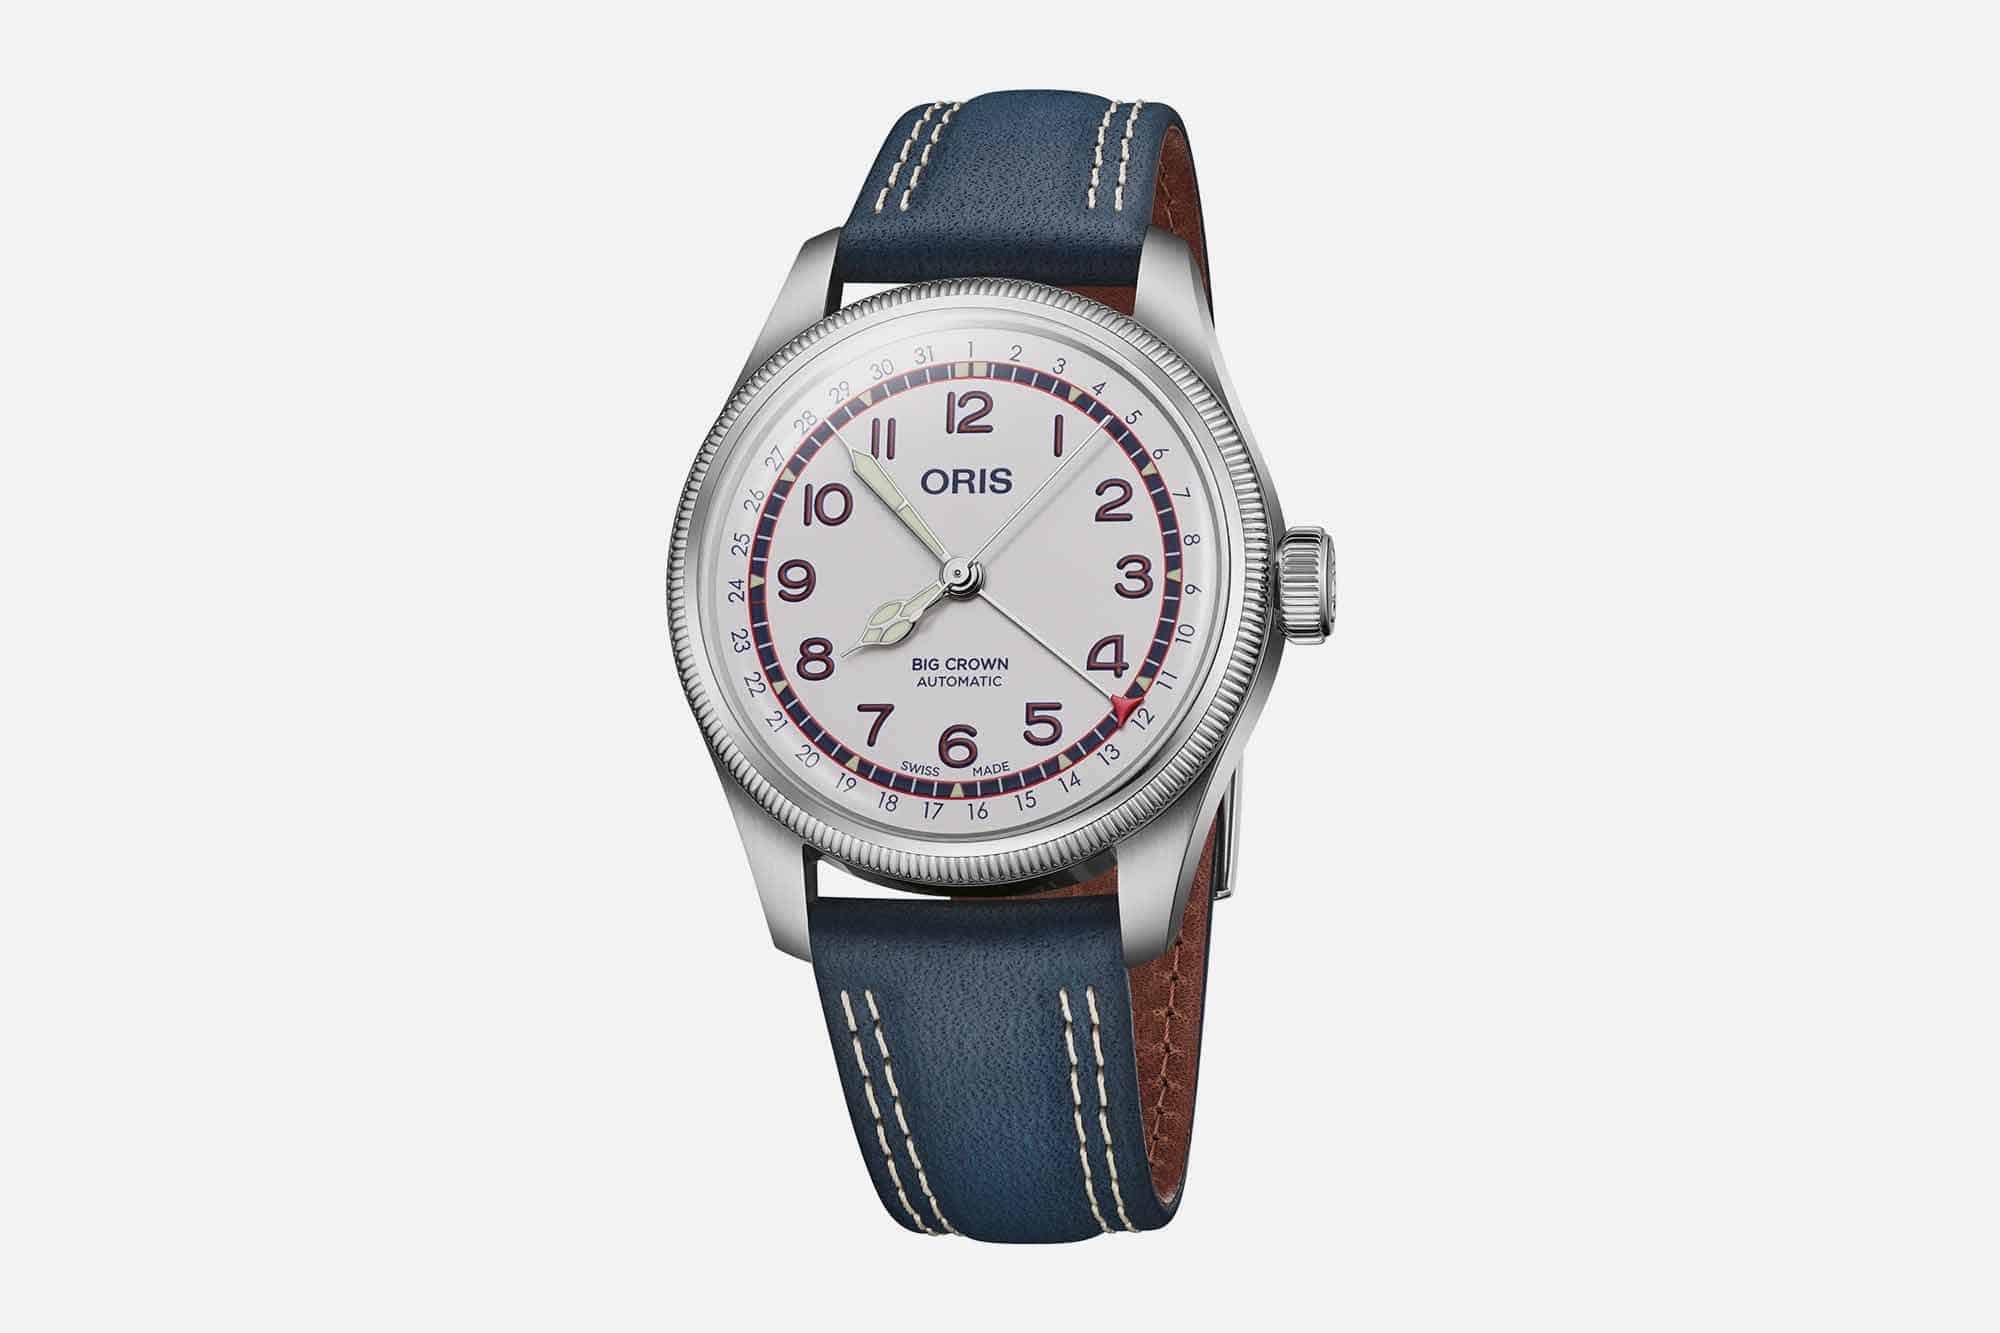 Oris Celebrates the Life and Career of a Baseball Legend with the Hank Aaron Limited Edition